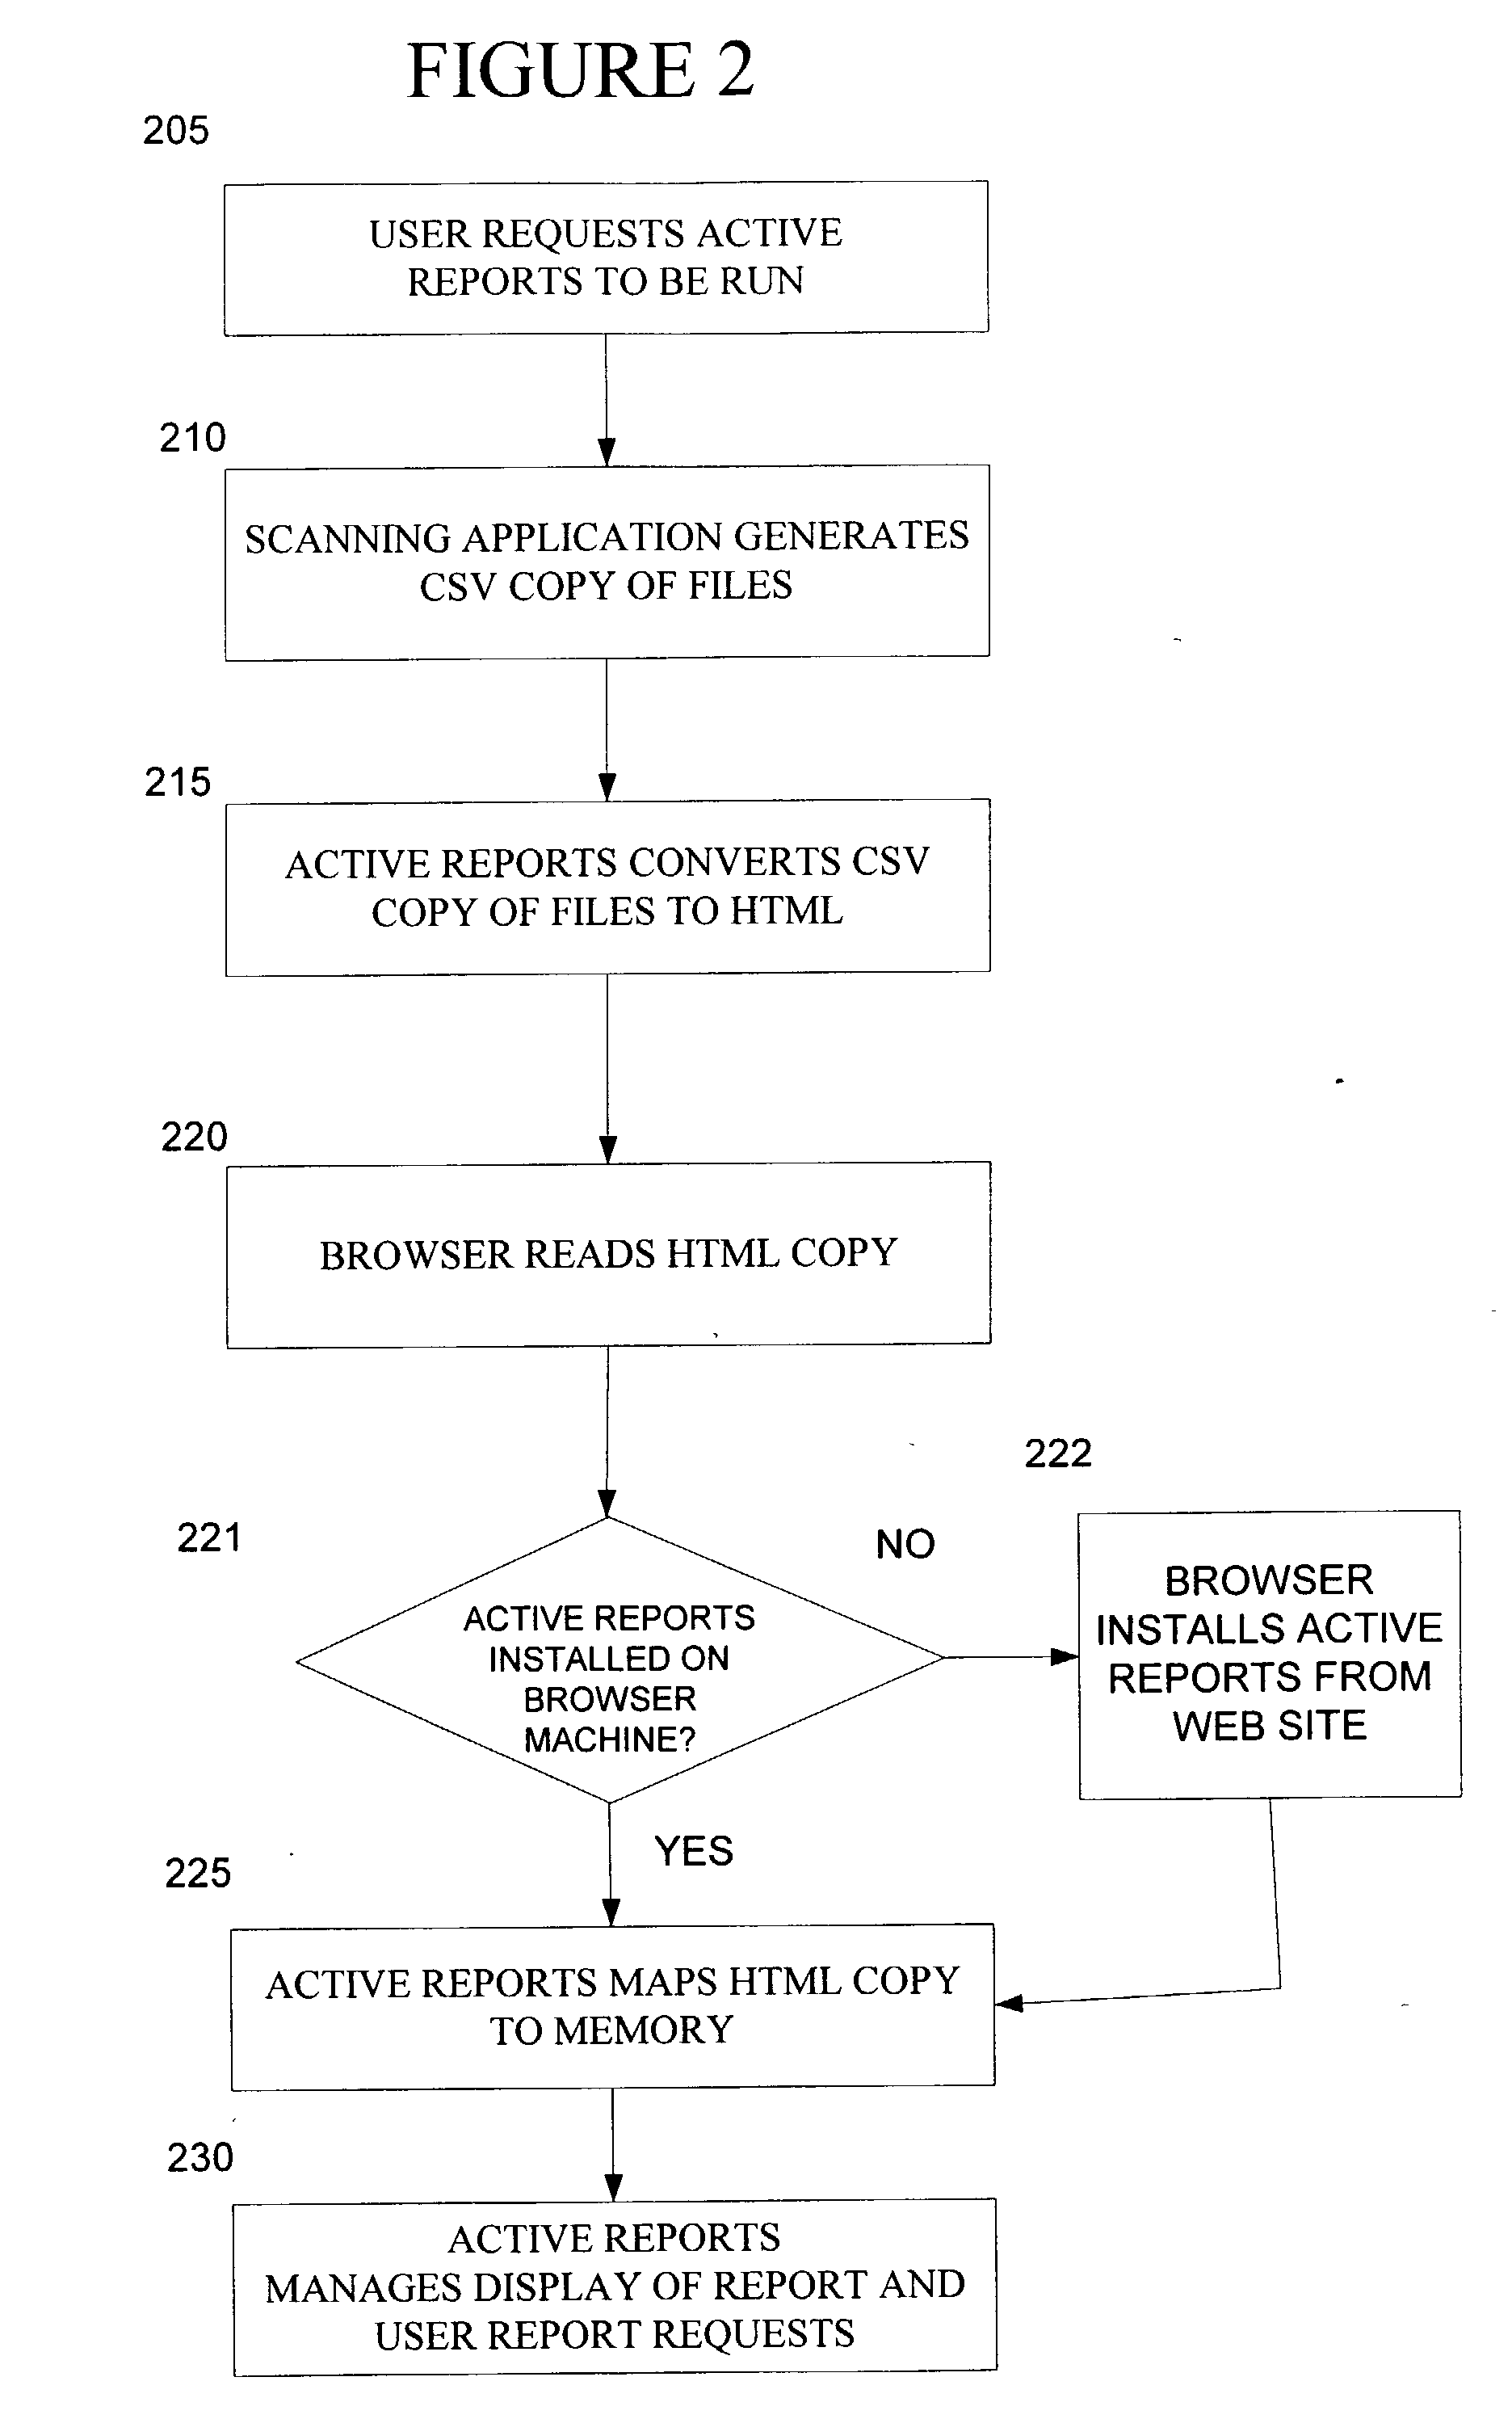 System for active reports with drill down capability using memory mapping of HTML files with embedded data